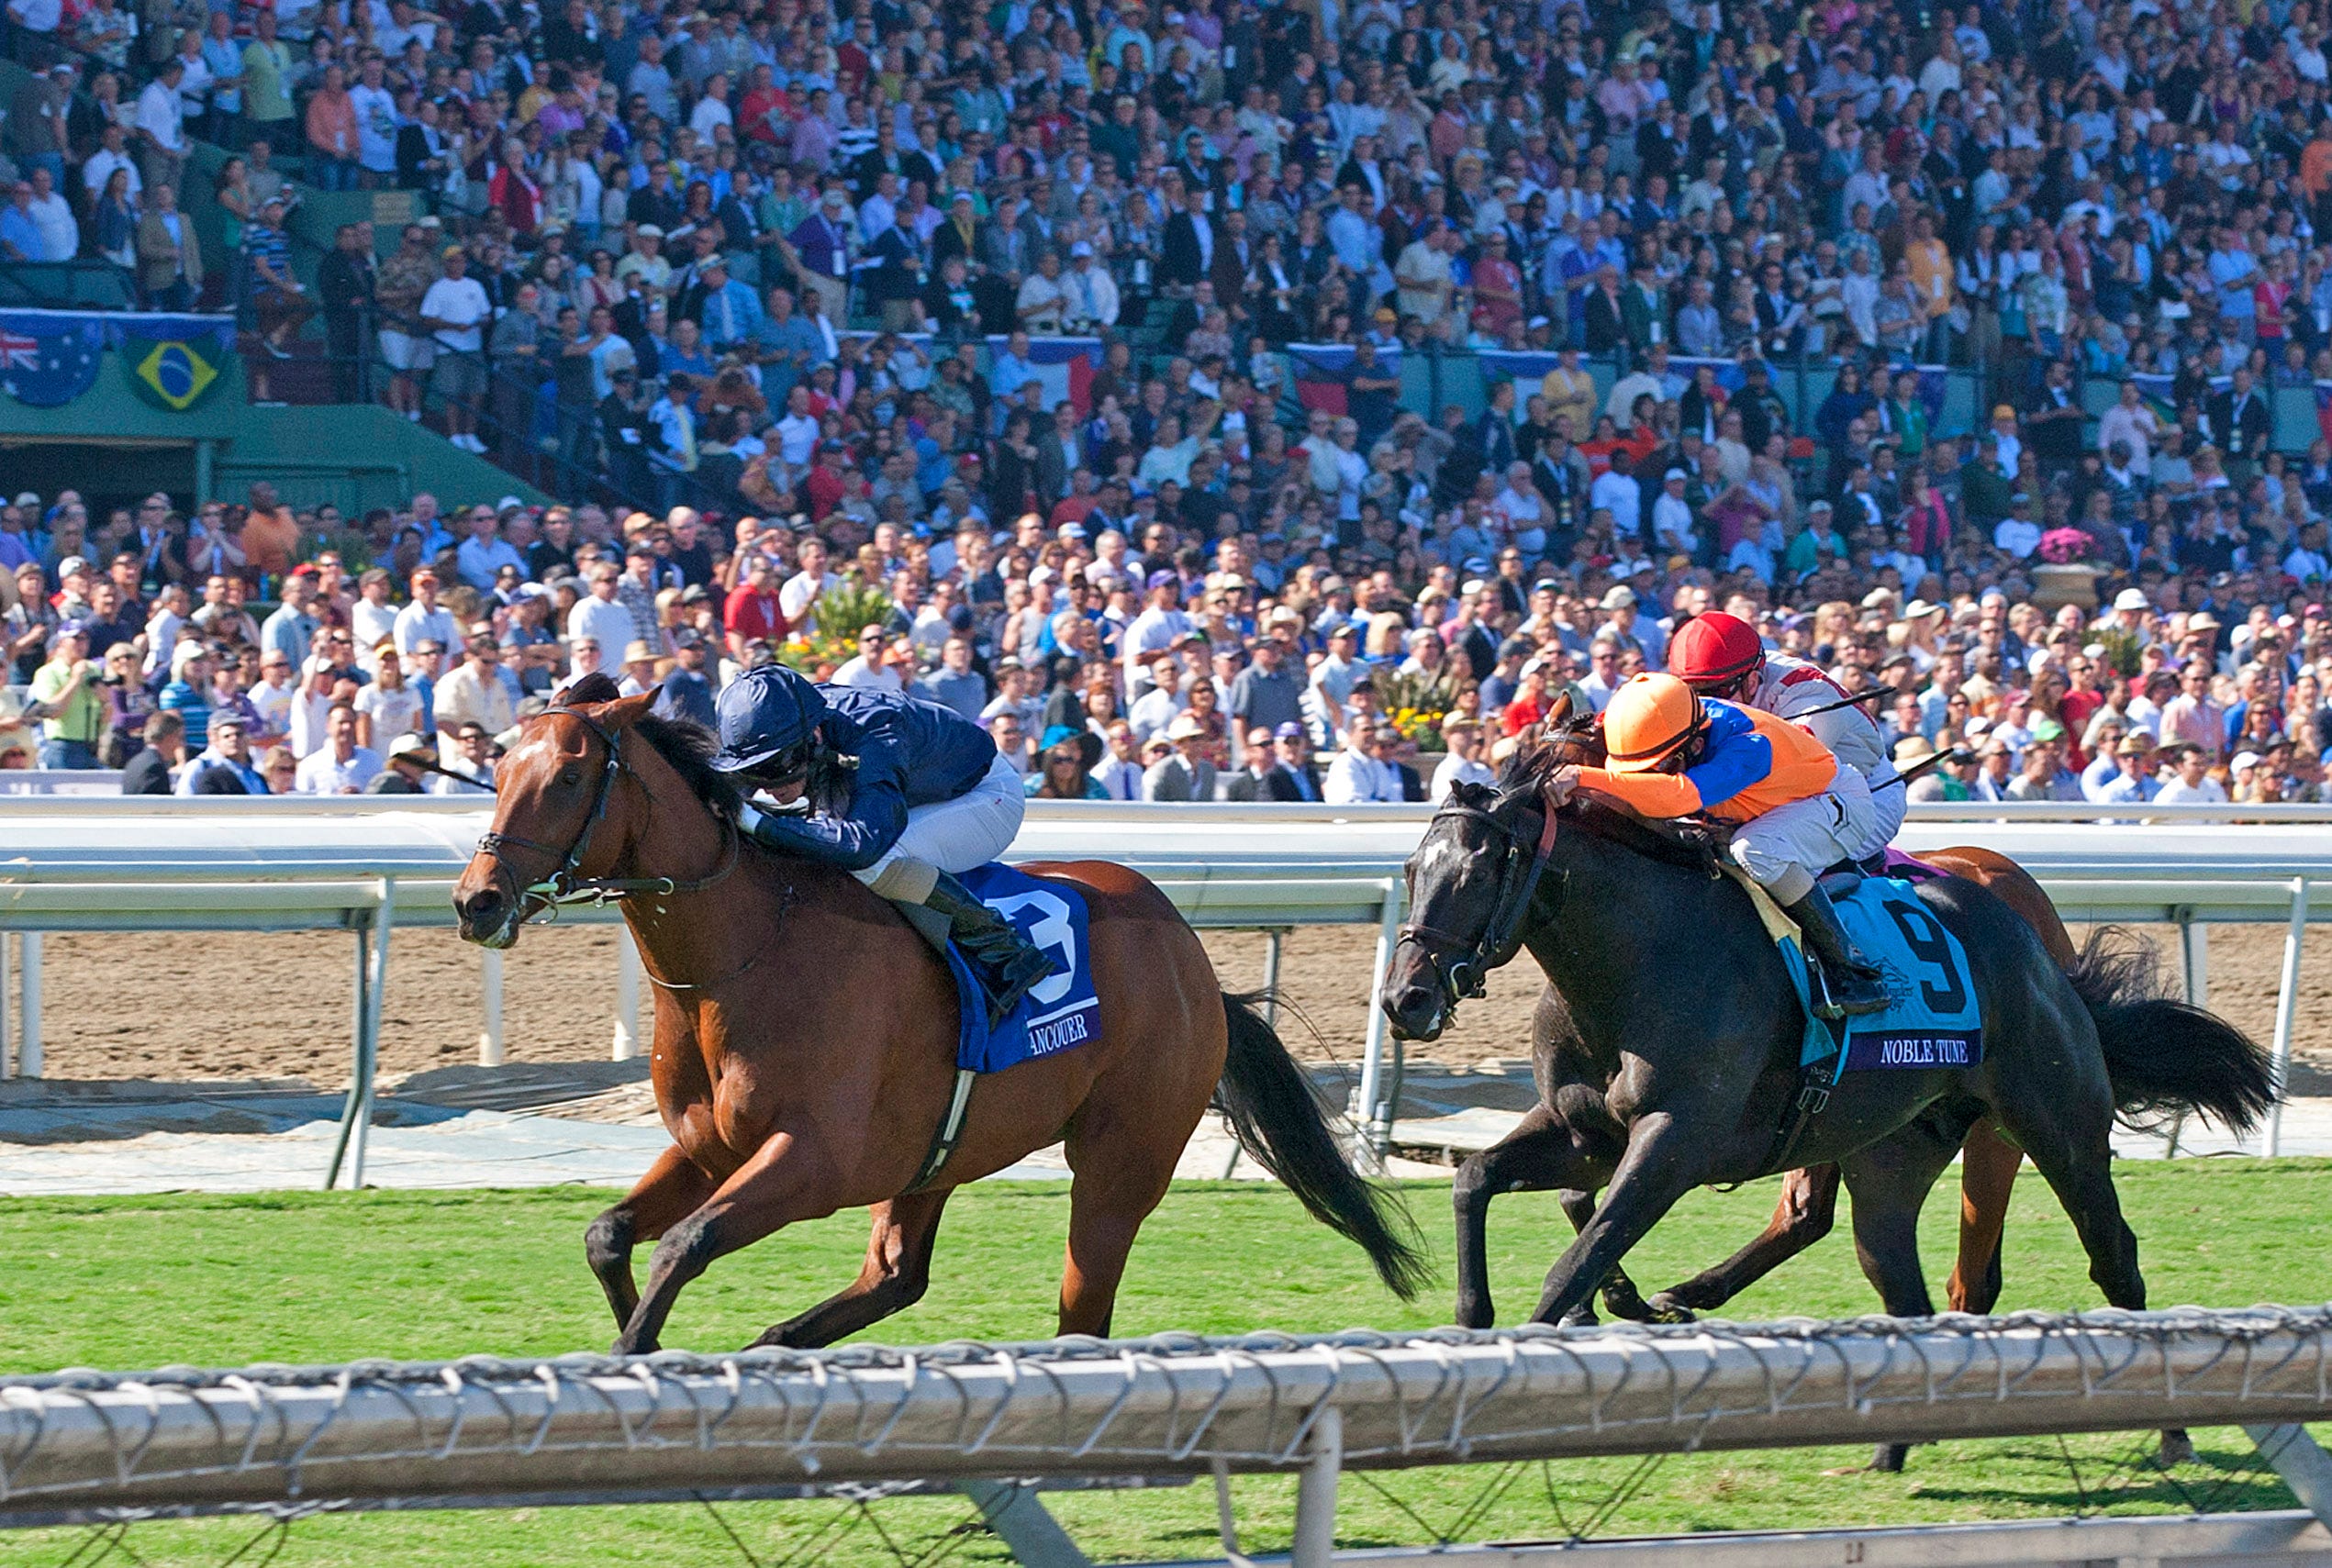 The Cup Horse Racing in Vancouver